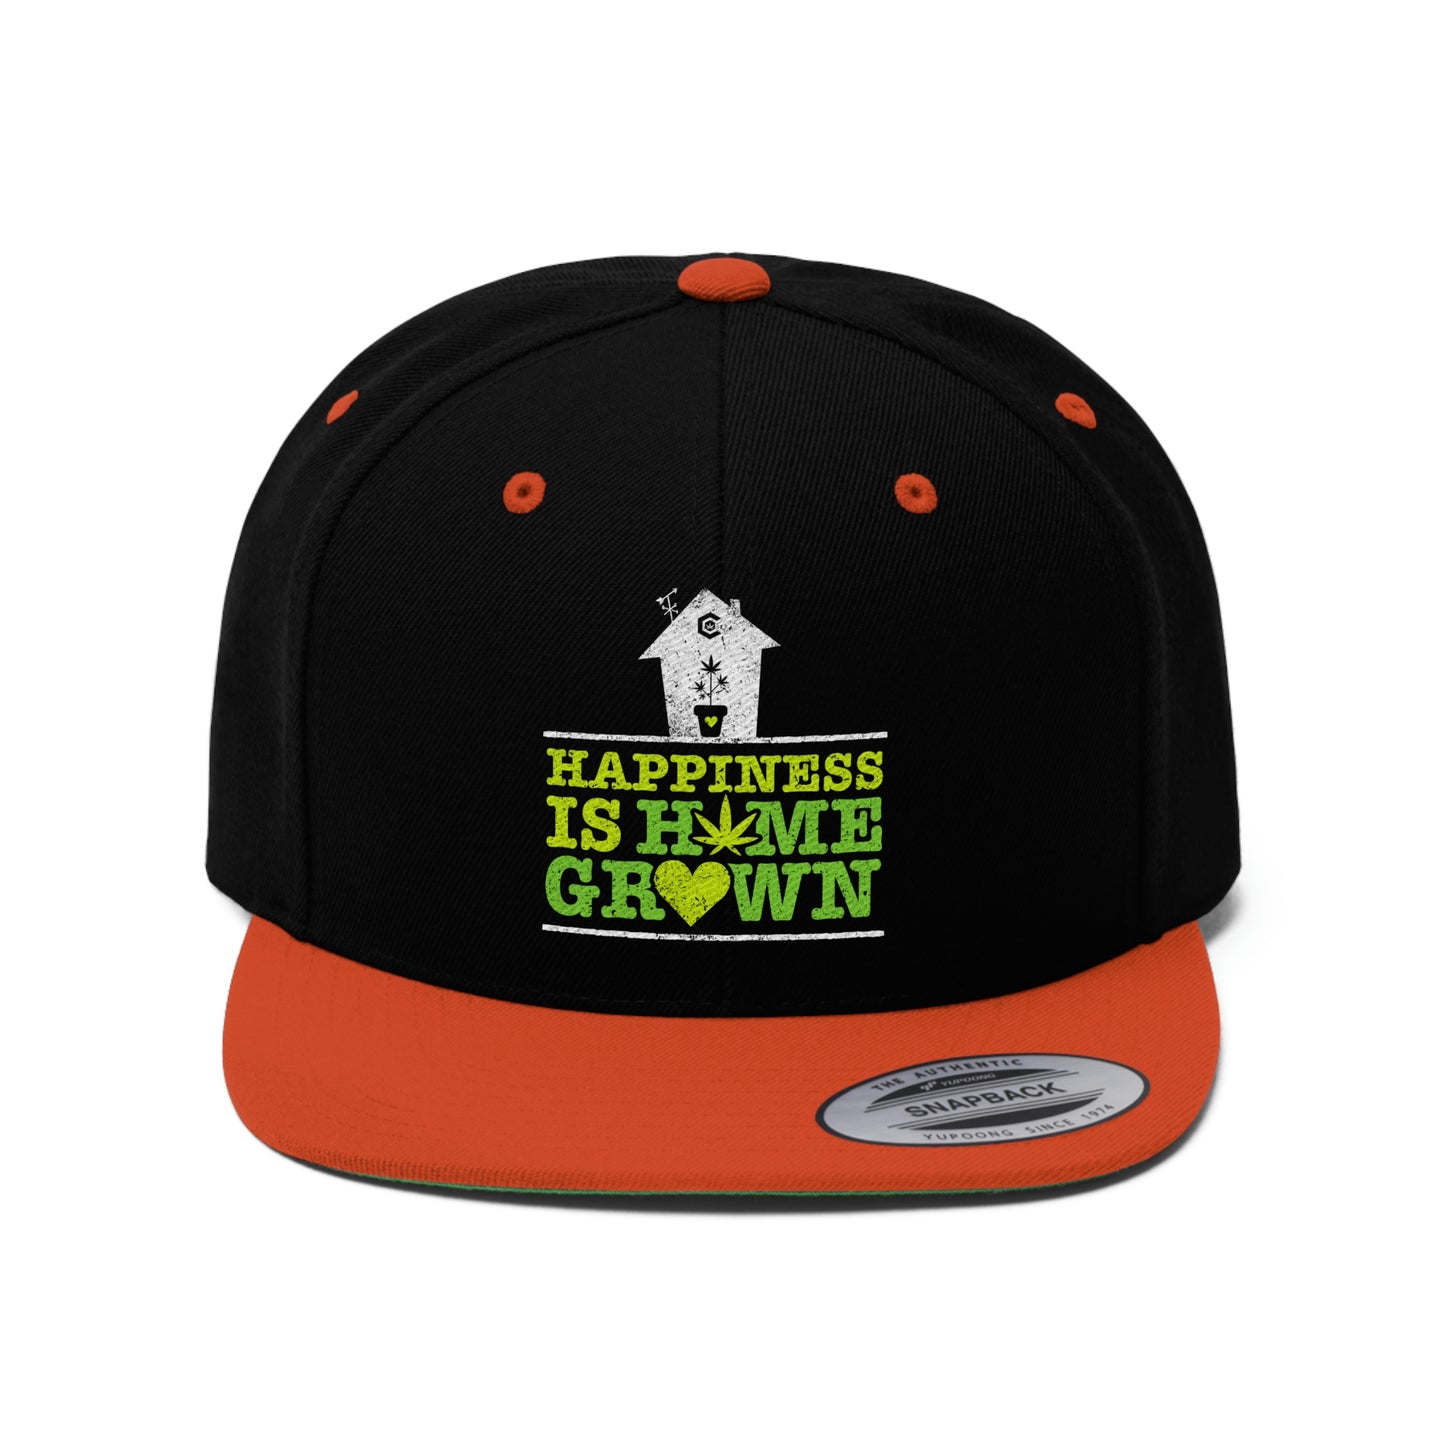 A photo of the orange and black Happiness Is Homegrown Marijuana Snapback Hat with white house on above the lettering